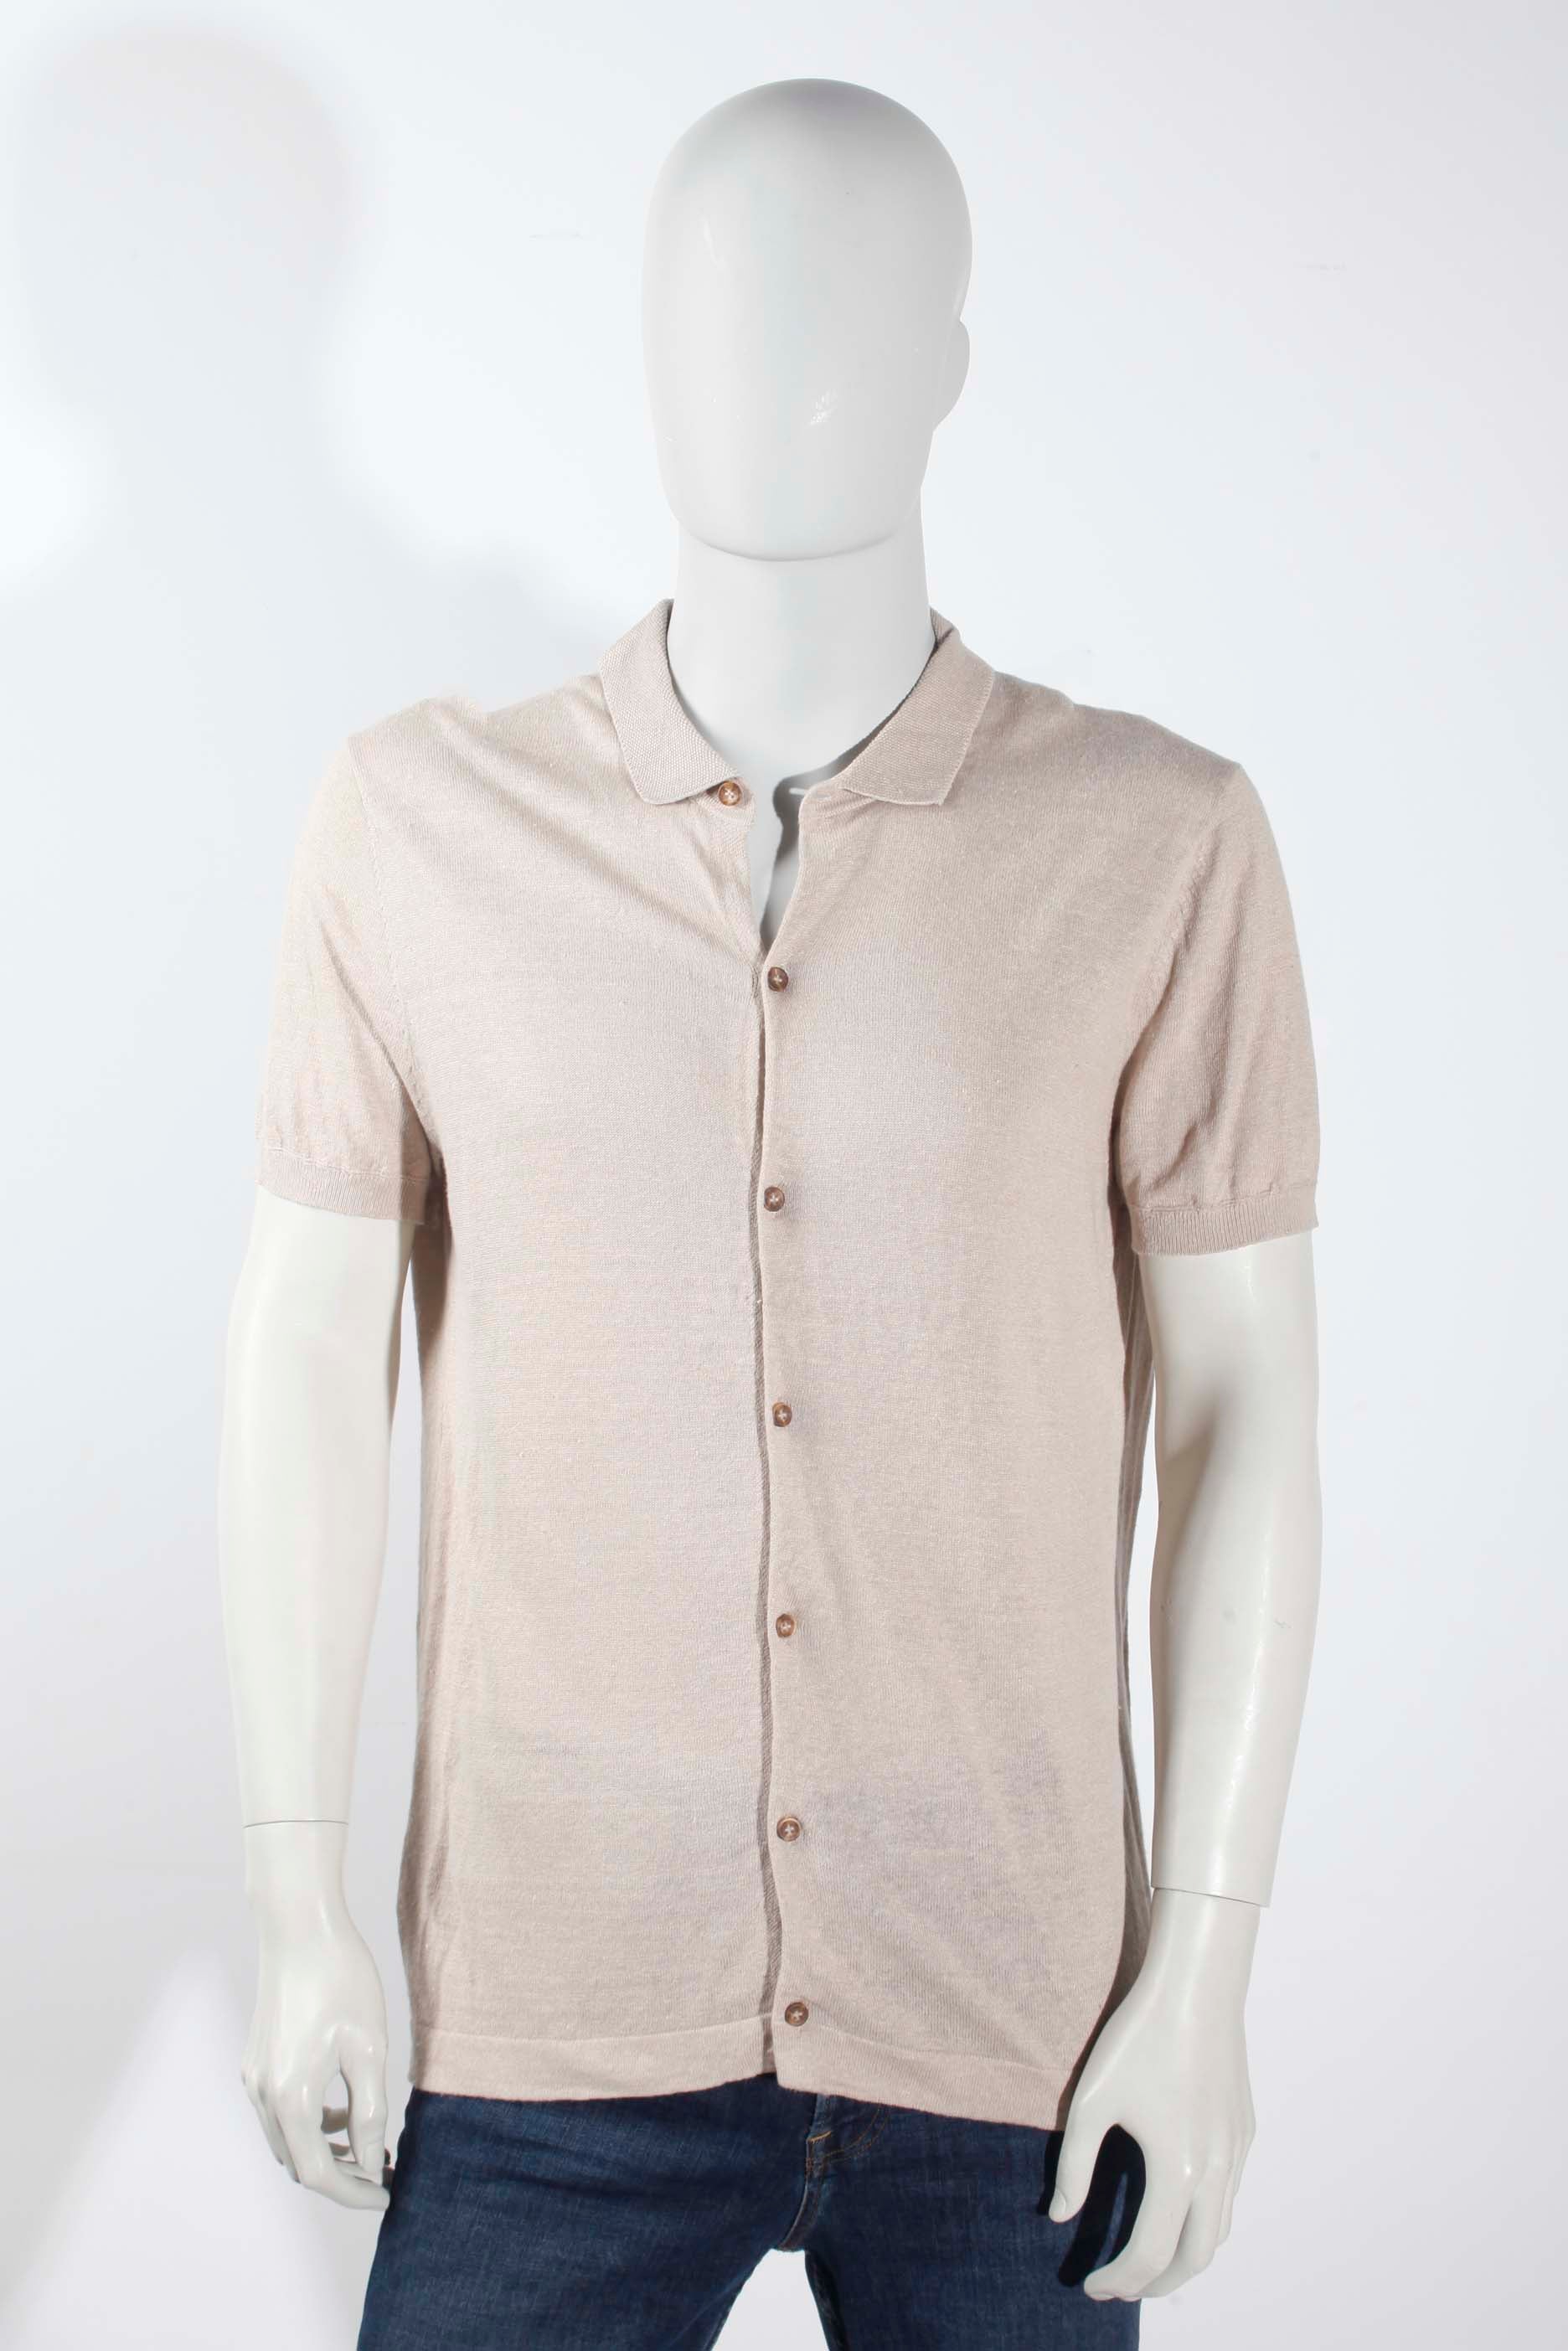 Mens Button-Up Cream Polo Shirt (Large)